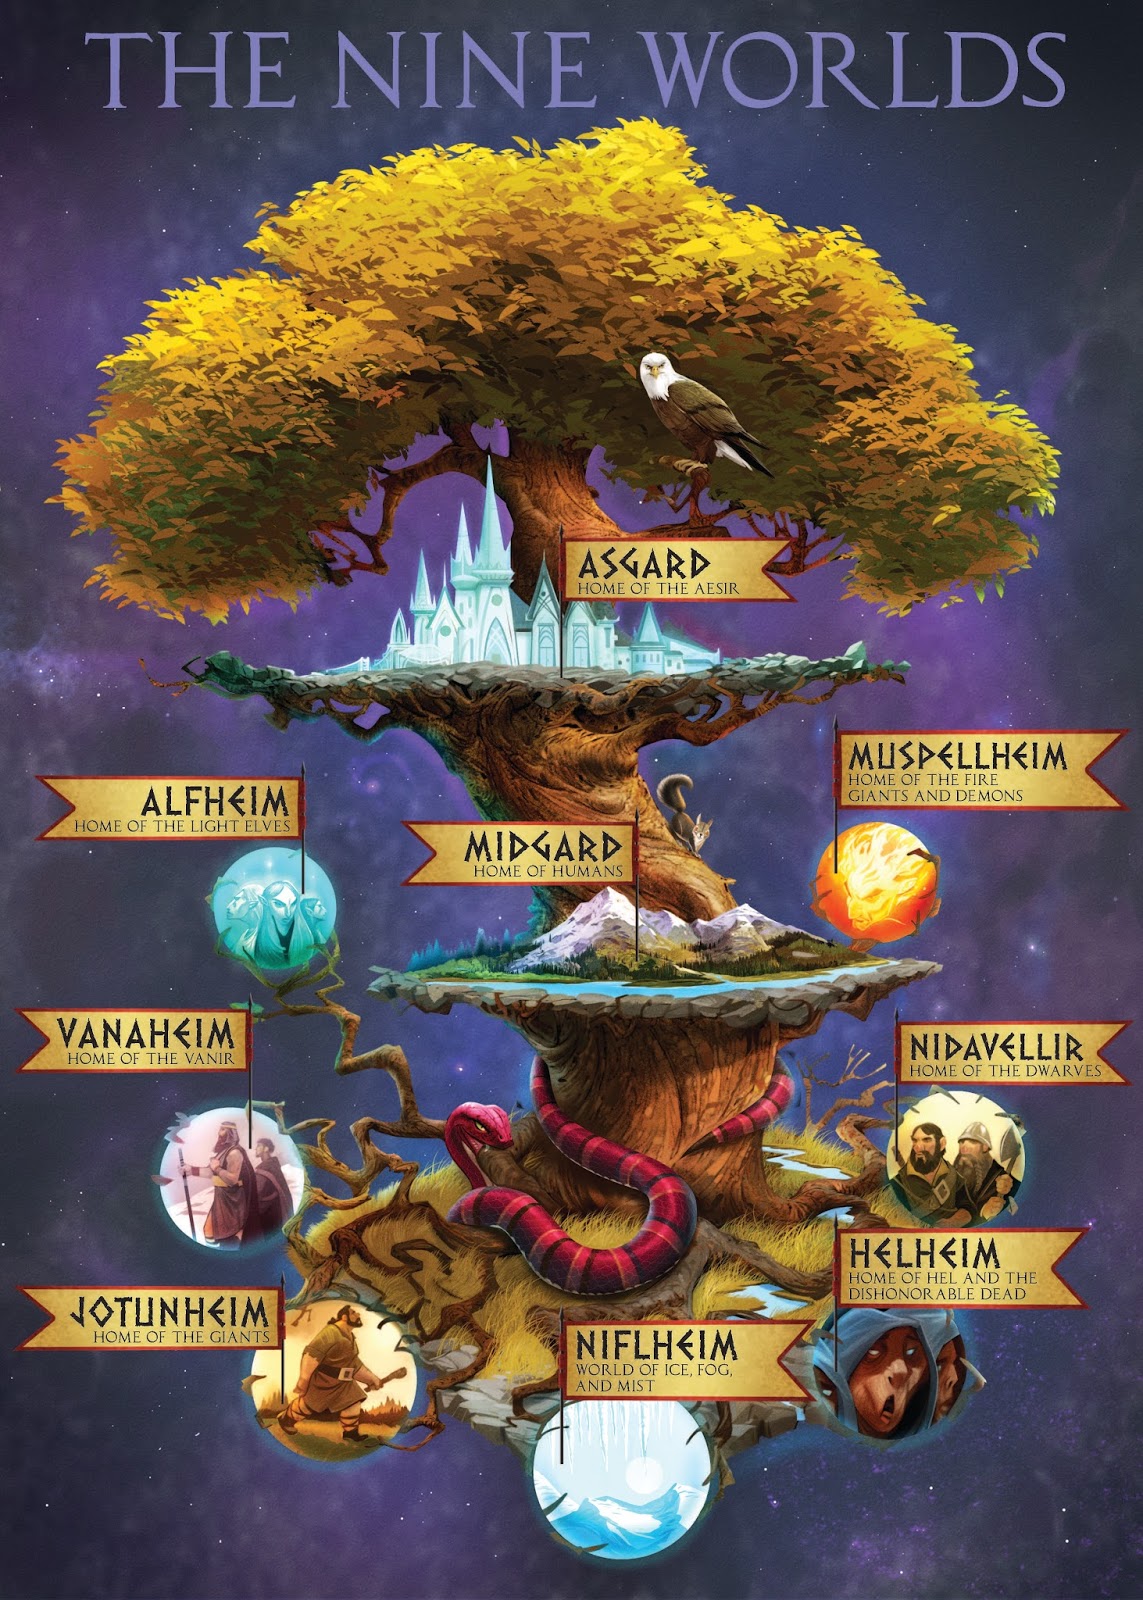 Order of Yggdrasil in the North